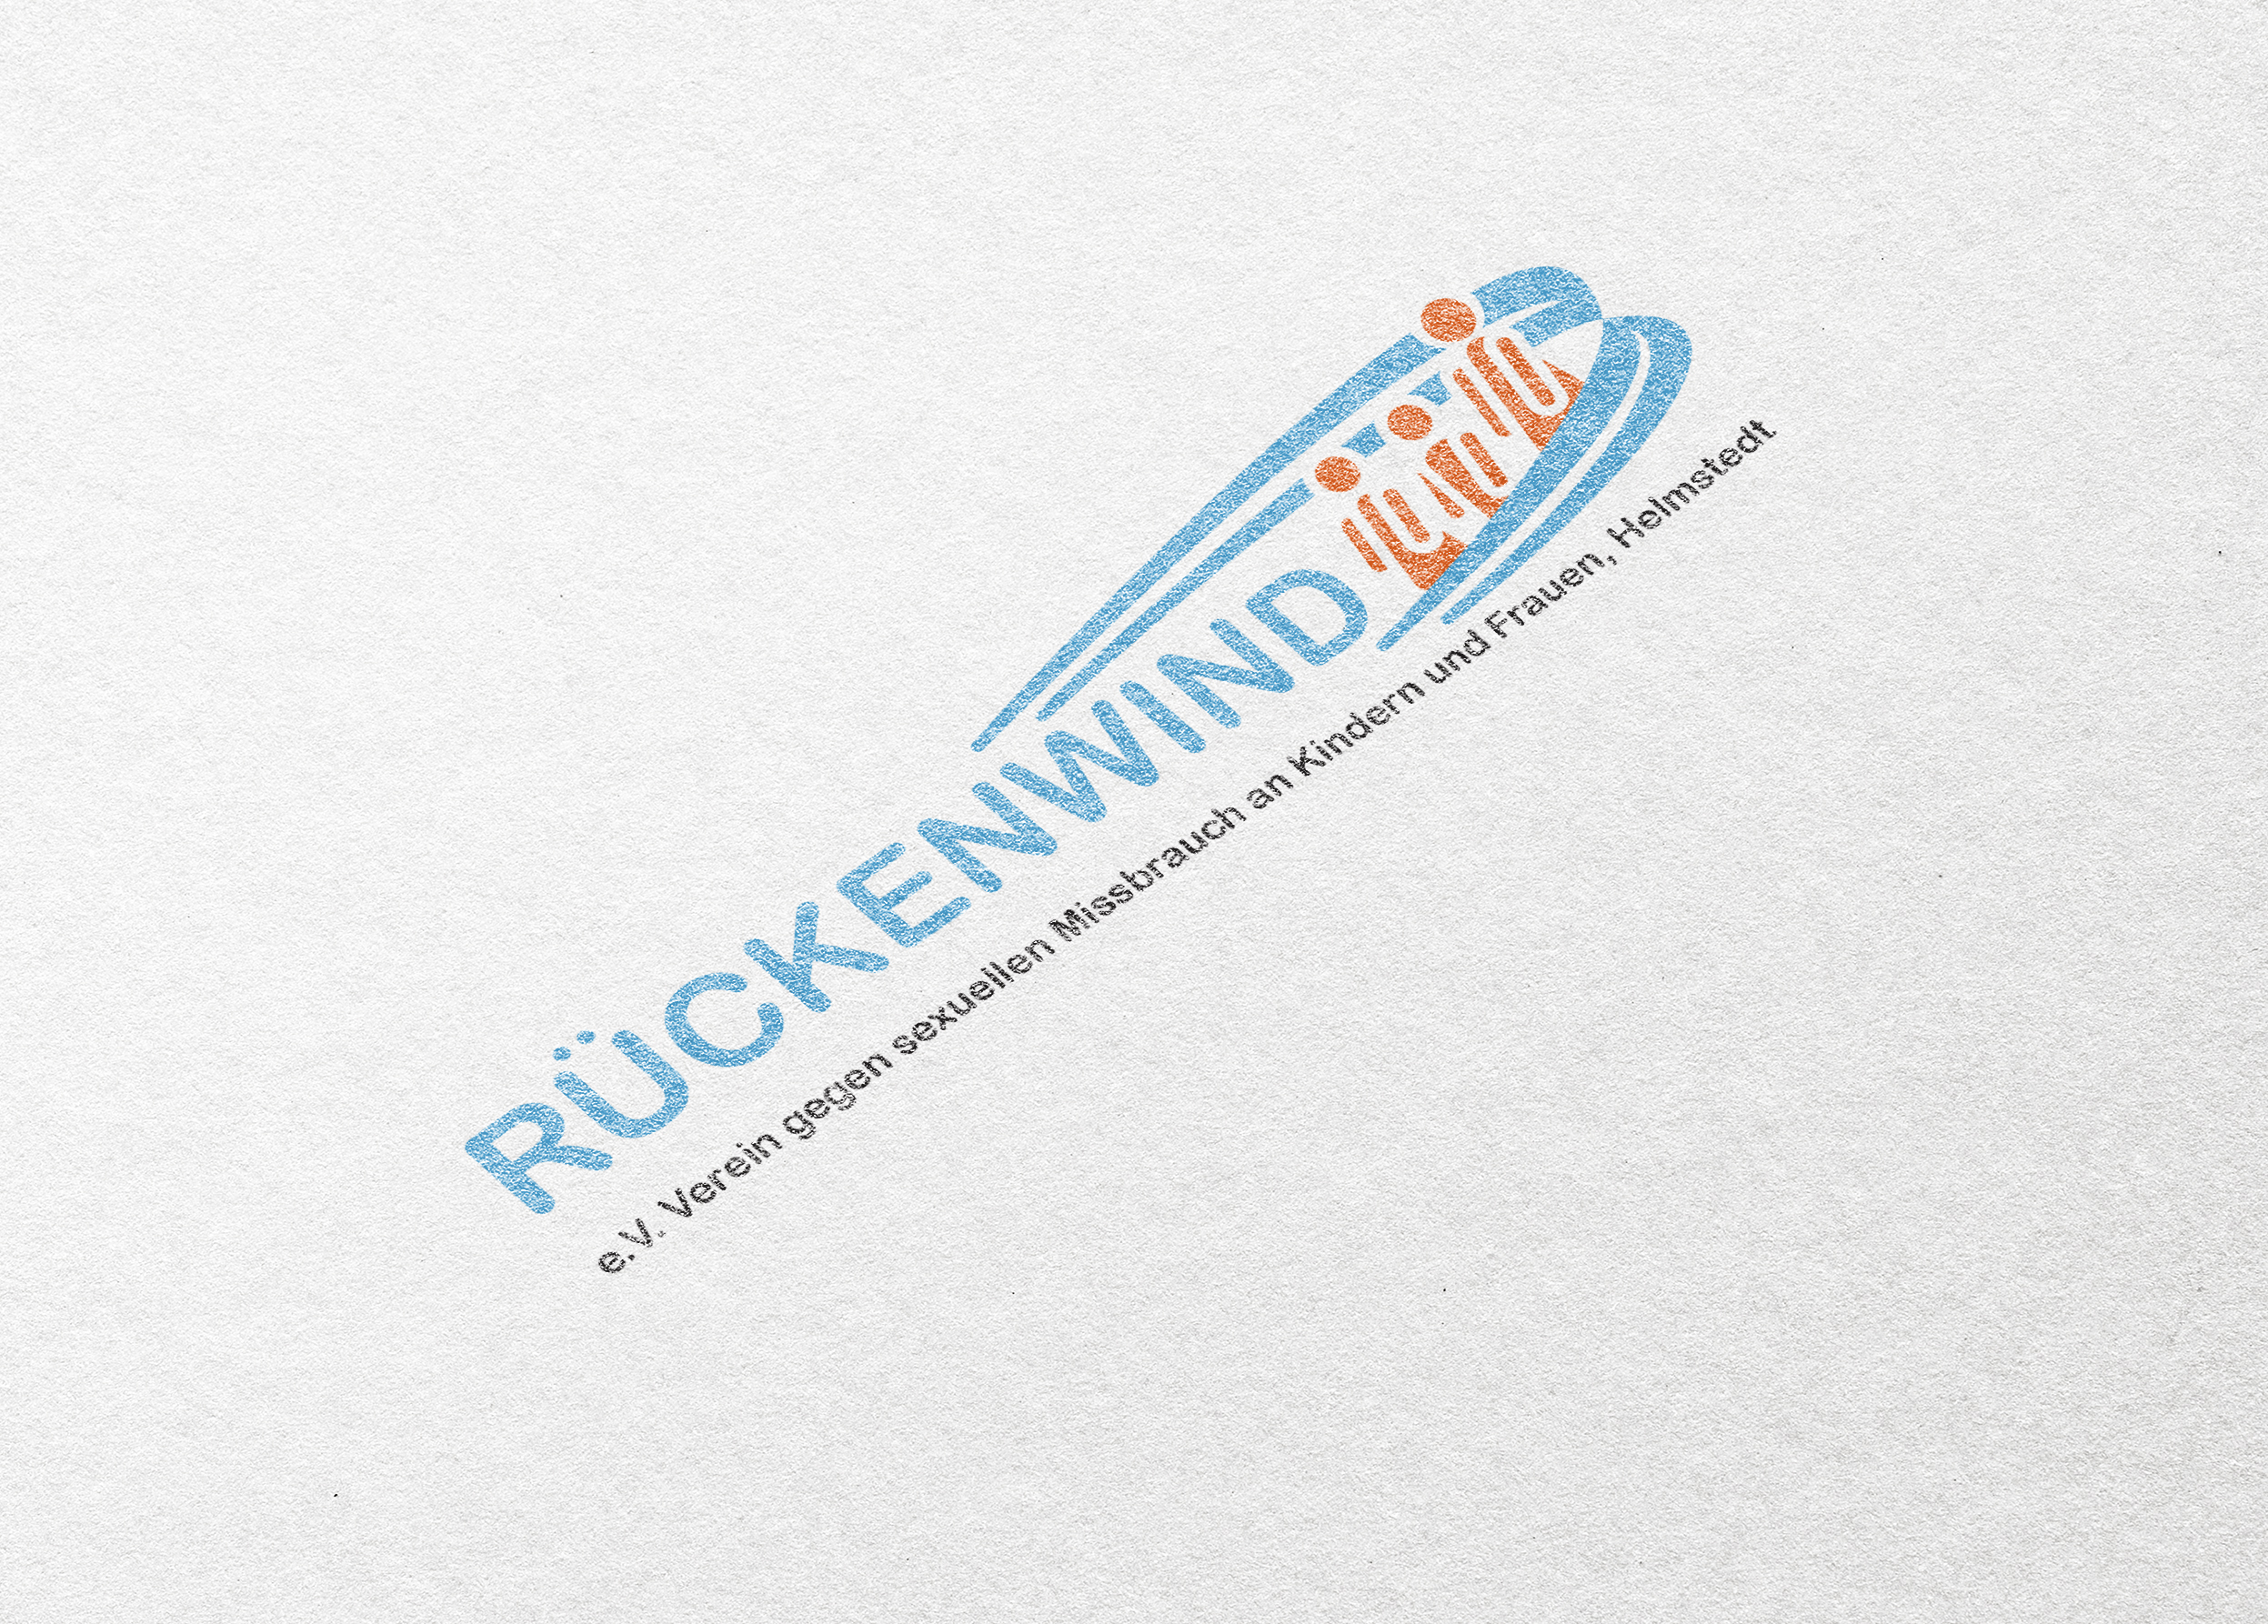 Company Co. business logo psd template in embossed paper texture